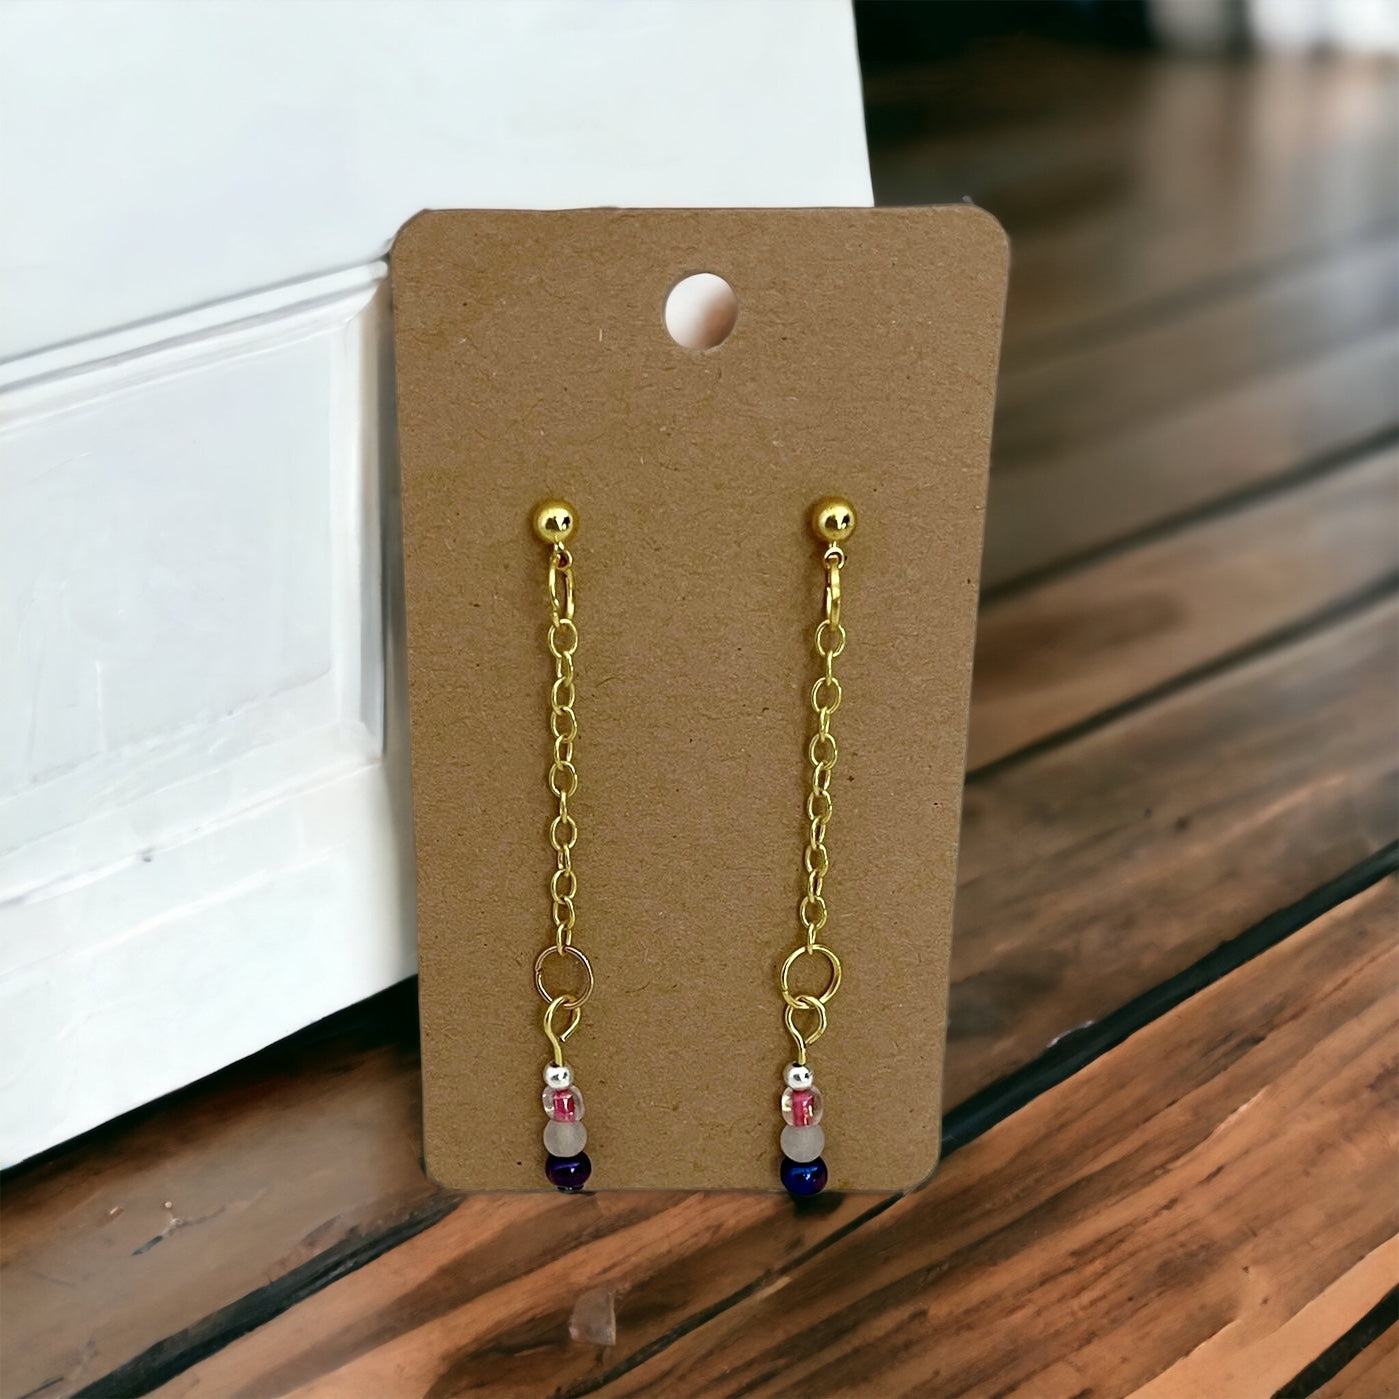 Steamed Stardust Earrings - Gold Chain with Beads